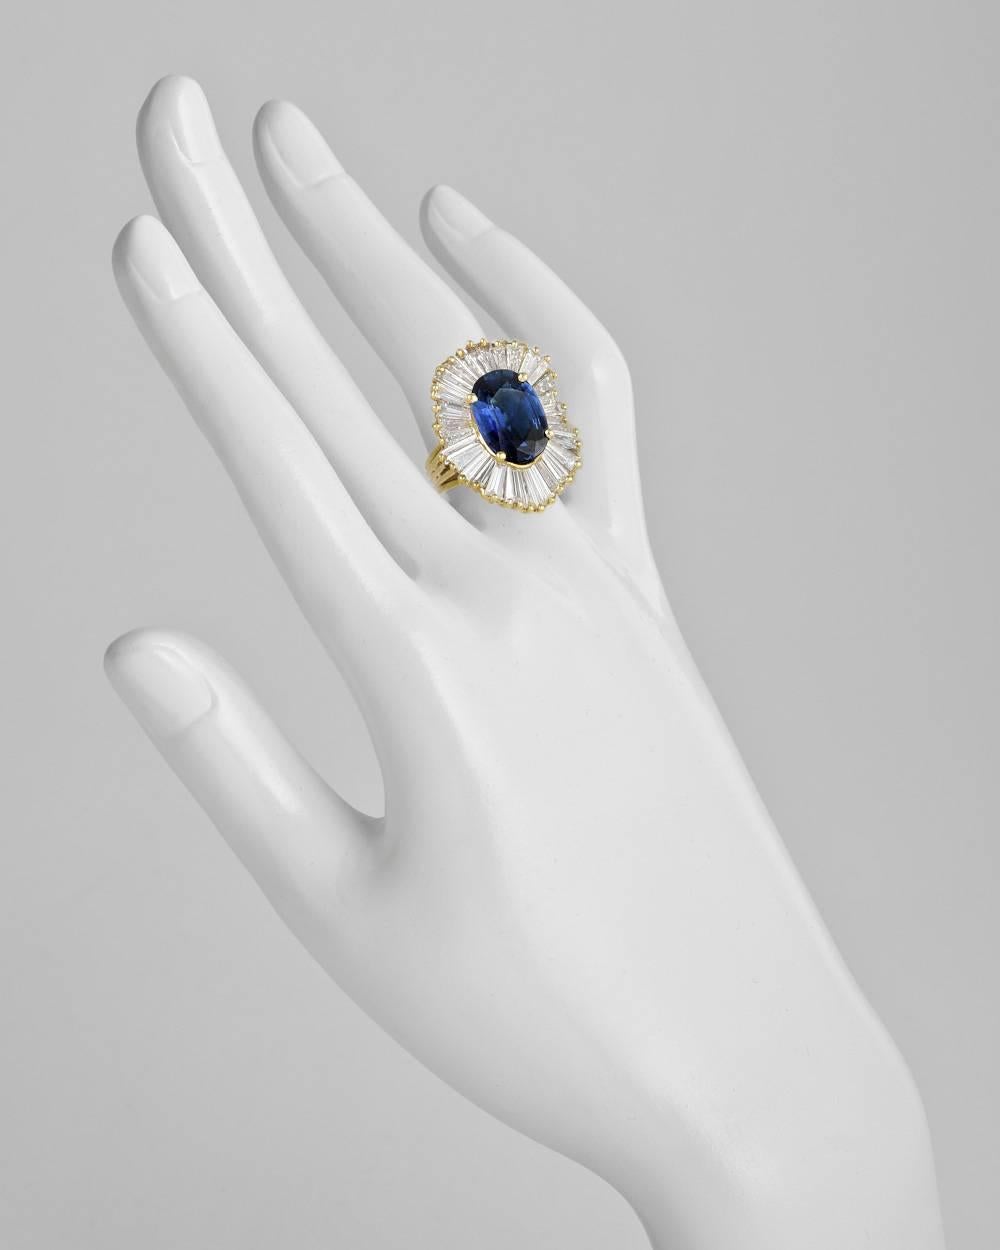 'Ballerina'-style sapphire and diamond ring, showcasing an oval-shaped sapphire weighing approximately 6.14 carats, the sapphire set within a tapered baguette-cut diamond surround, the diamonds weighing approximately 4.04 total carats (G-H color,